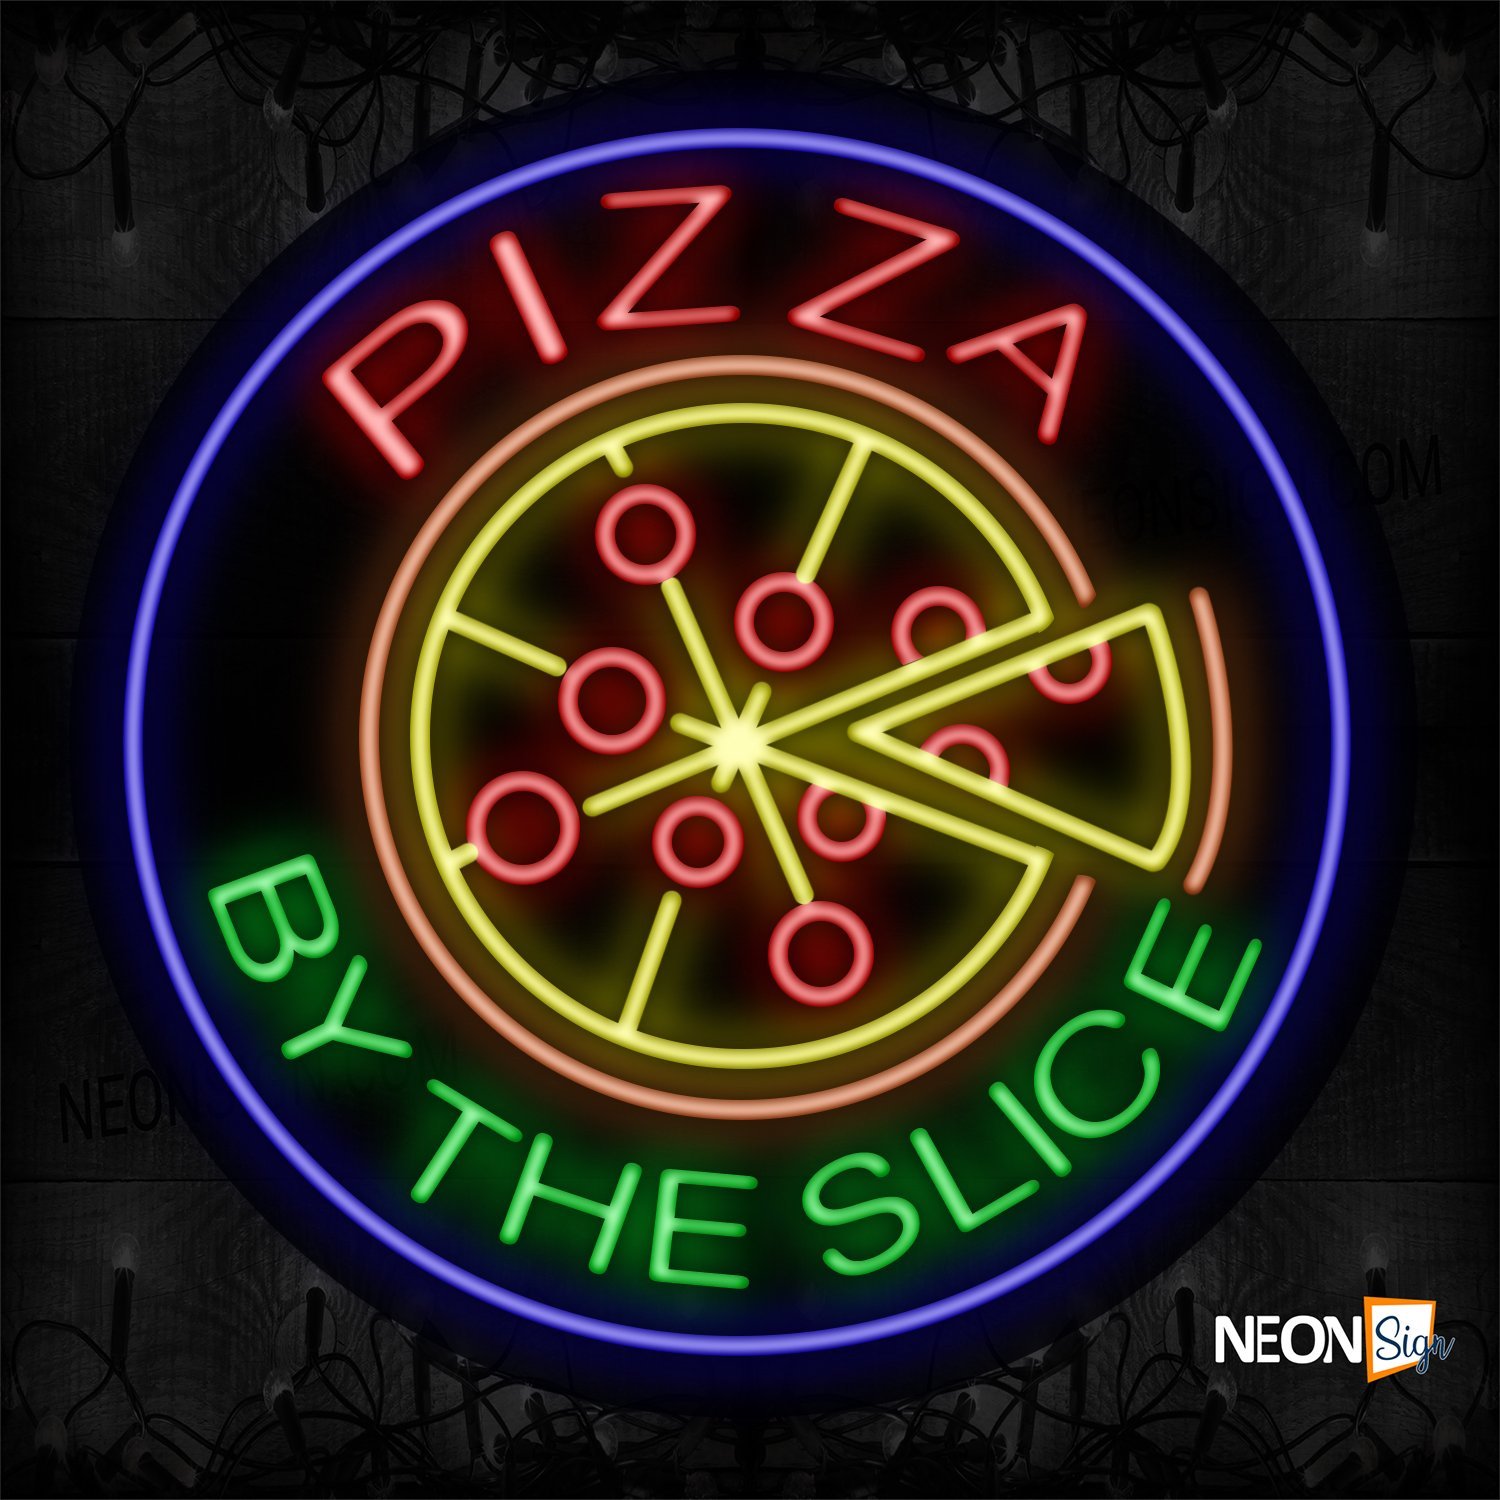 Image of 11163 Pizza By The Slice With Logo And Circle Border Neon Sign_26x26 Contoured Black Backing